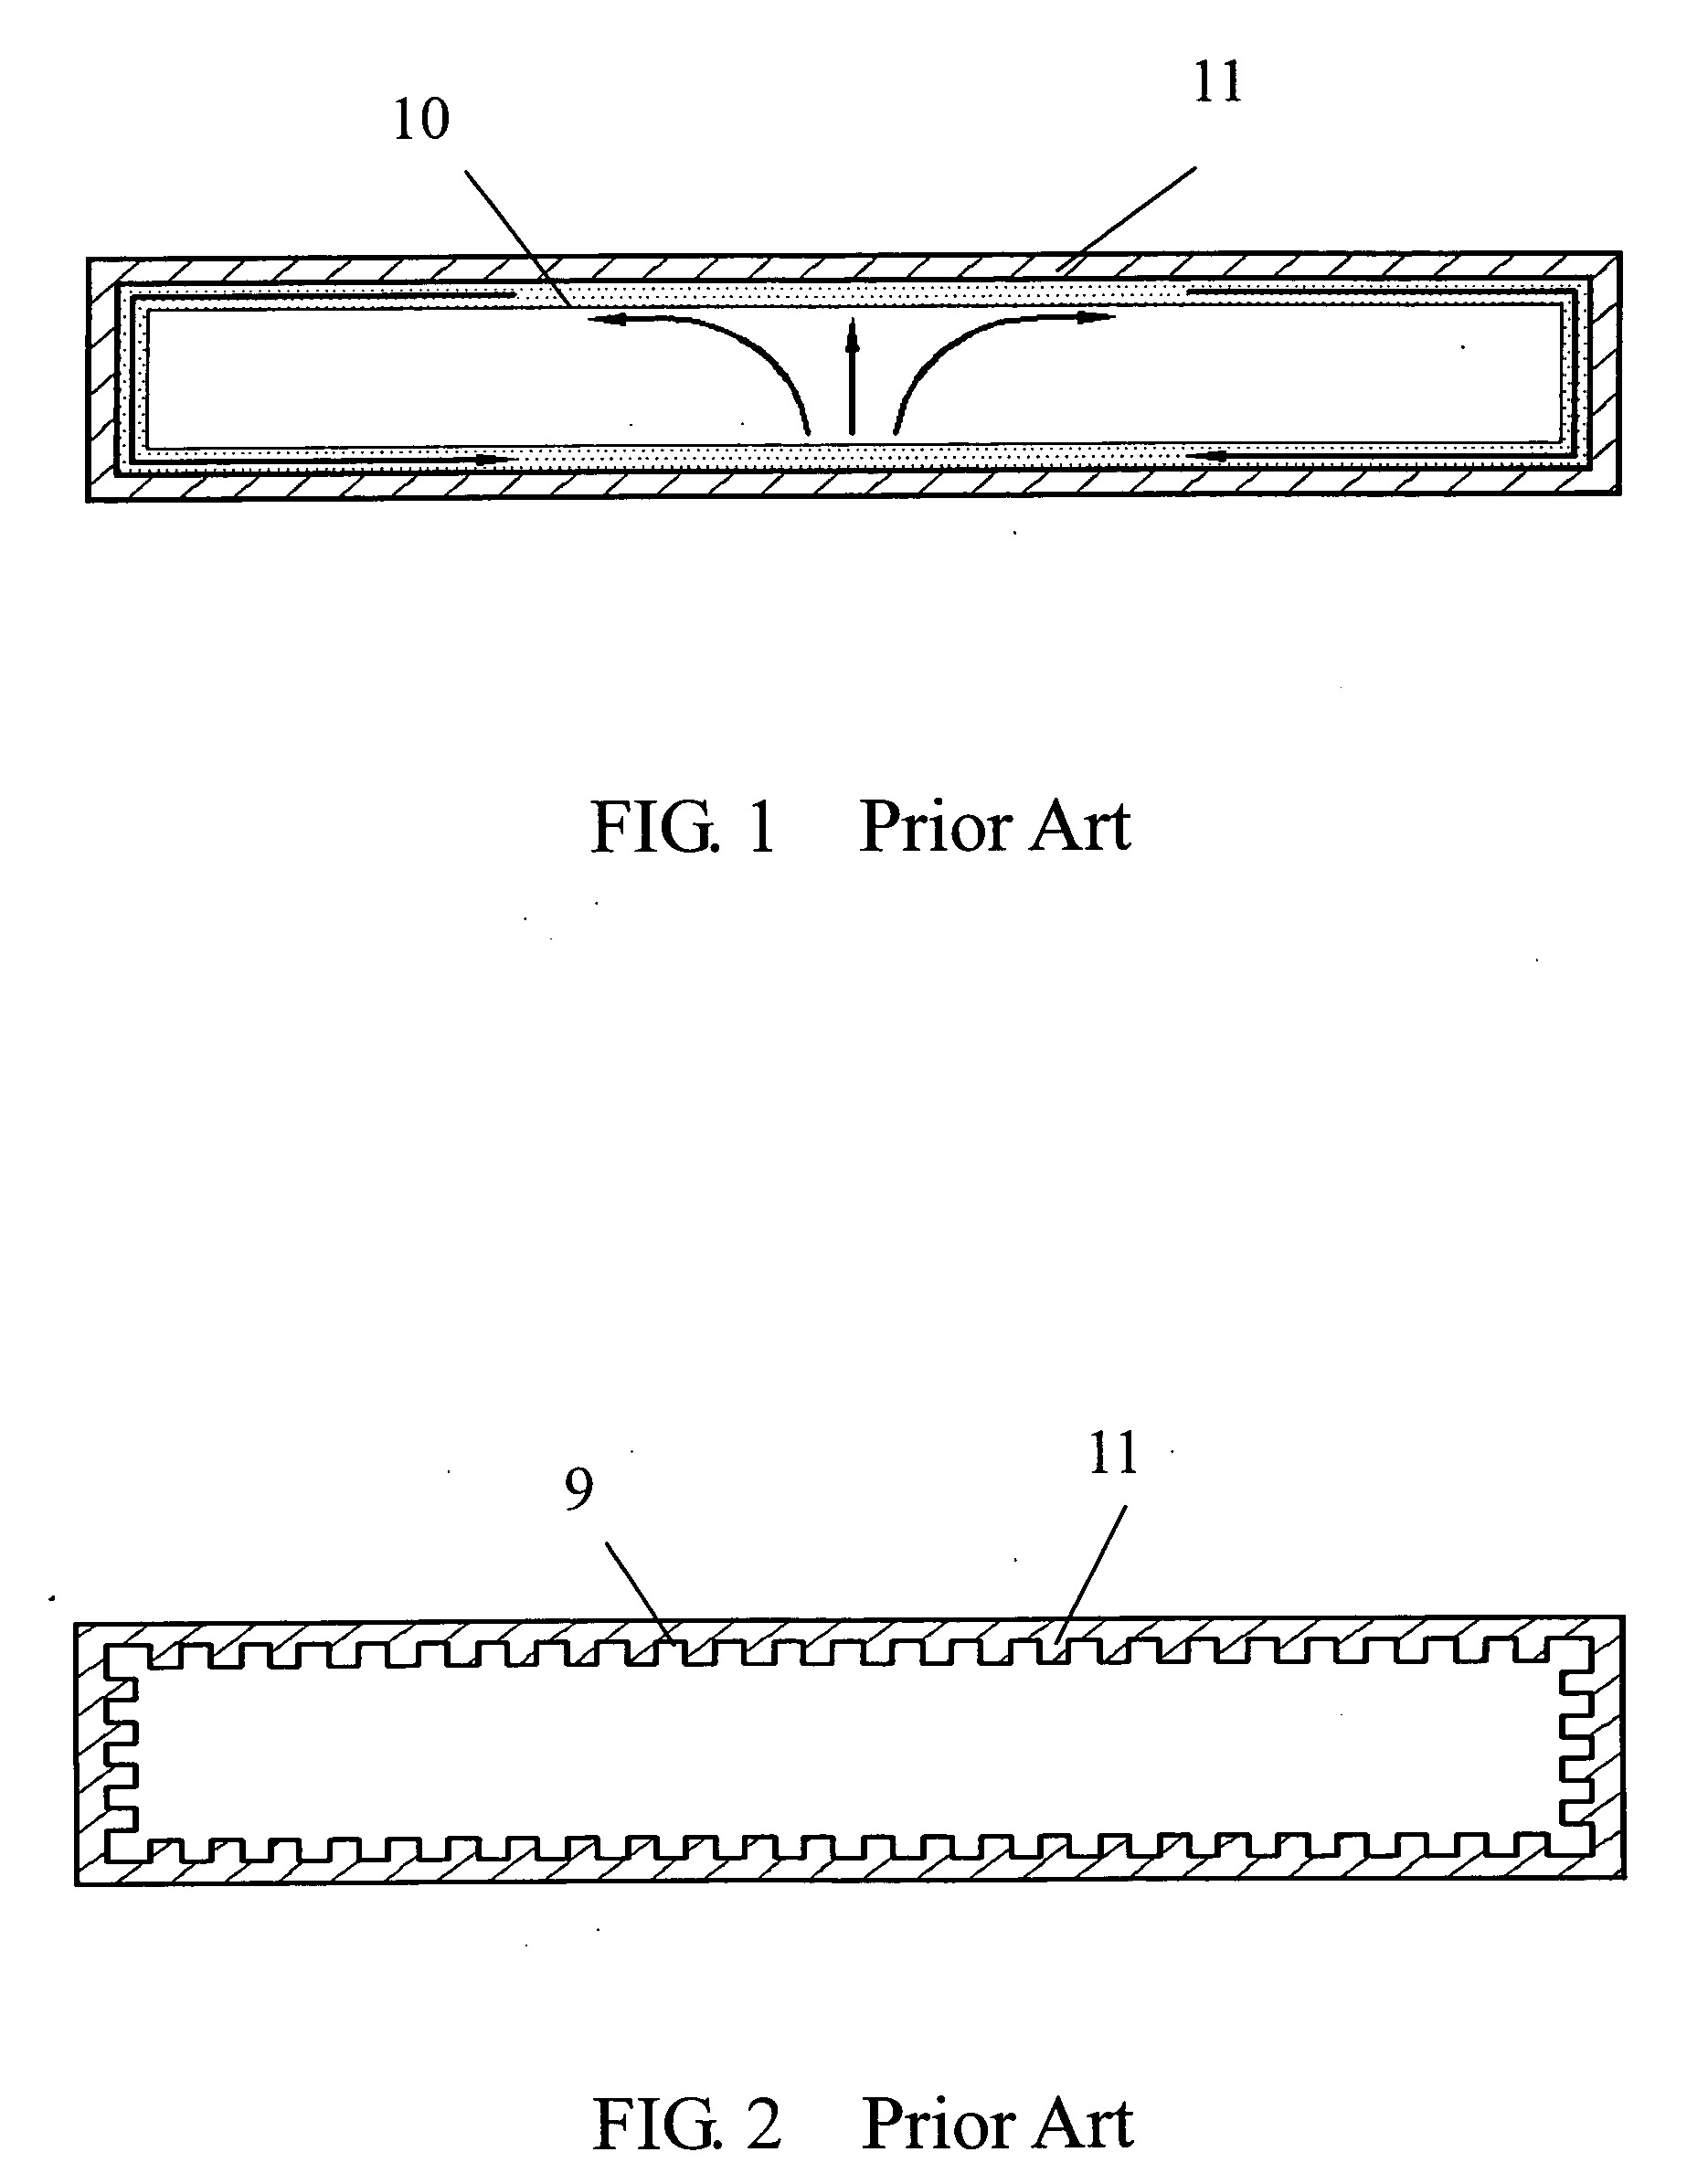 Flat-plate heat pipe containing channels